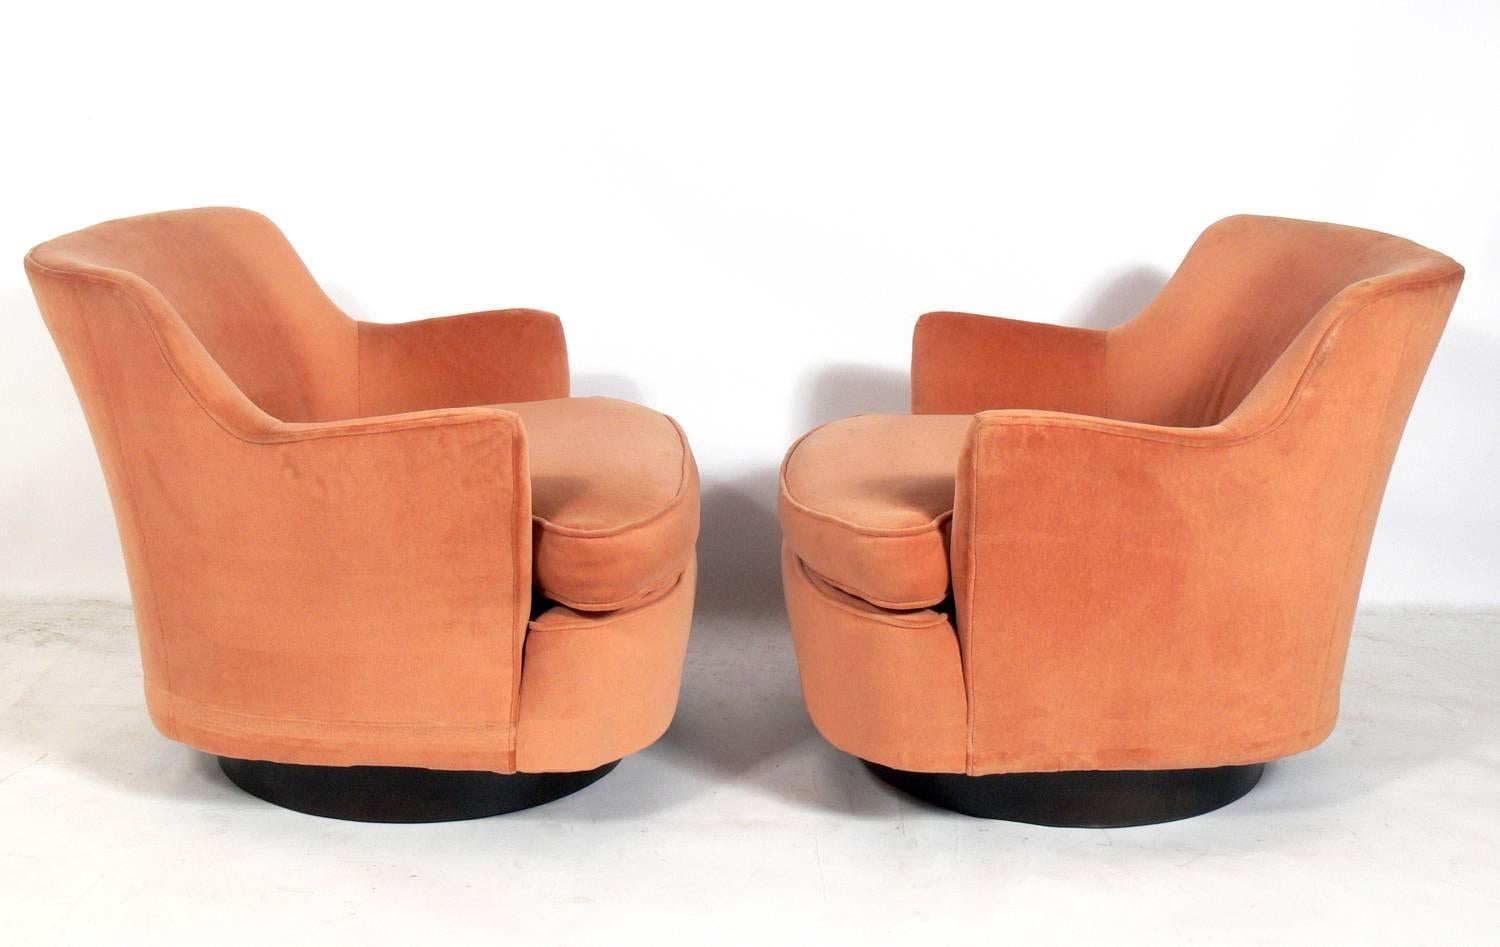 Pair of Mid-Century Modern swivel lounge chairs, attributed to Adrian Pearsall, unsigned, American, circa 1960s. These pieces are currently being reupholstered, and can be reupholstered in your fabric. The price noted below includes reupholstery in